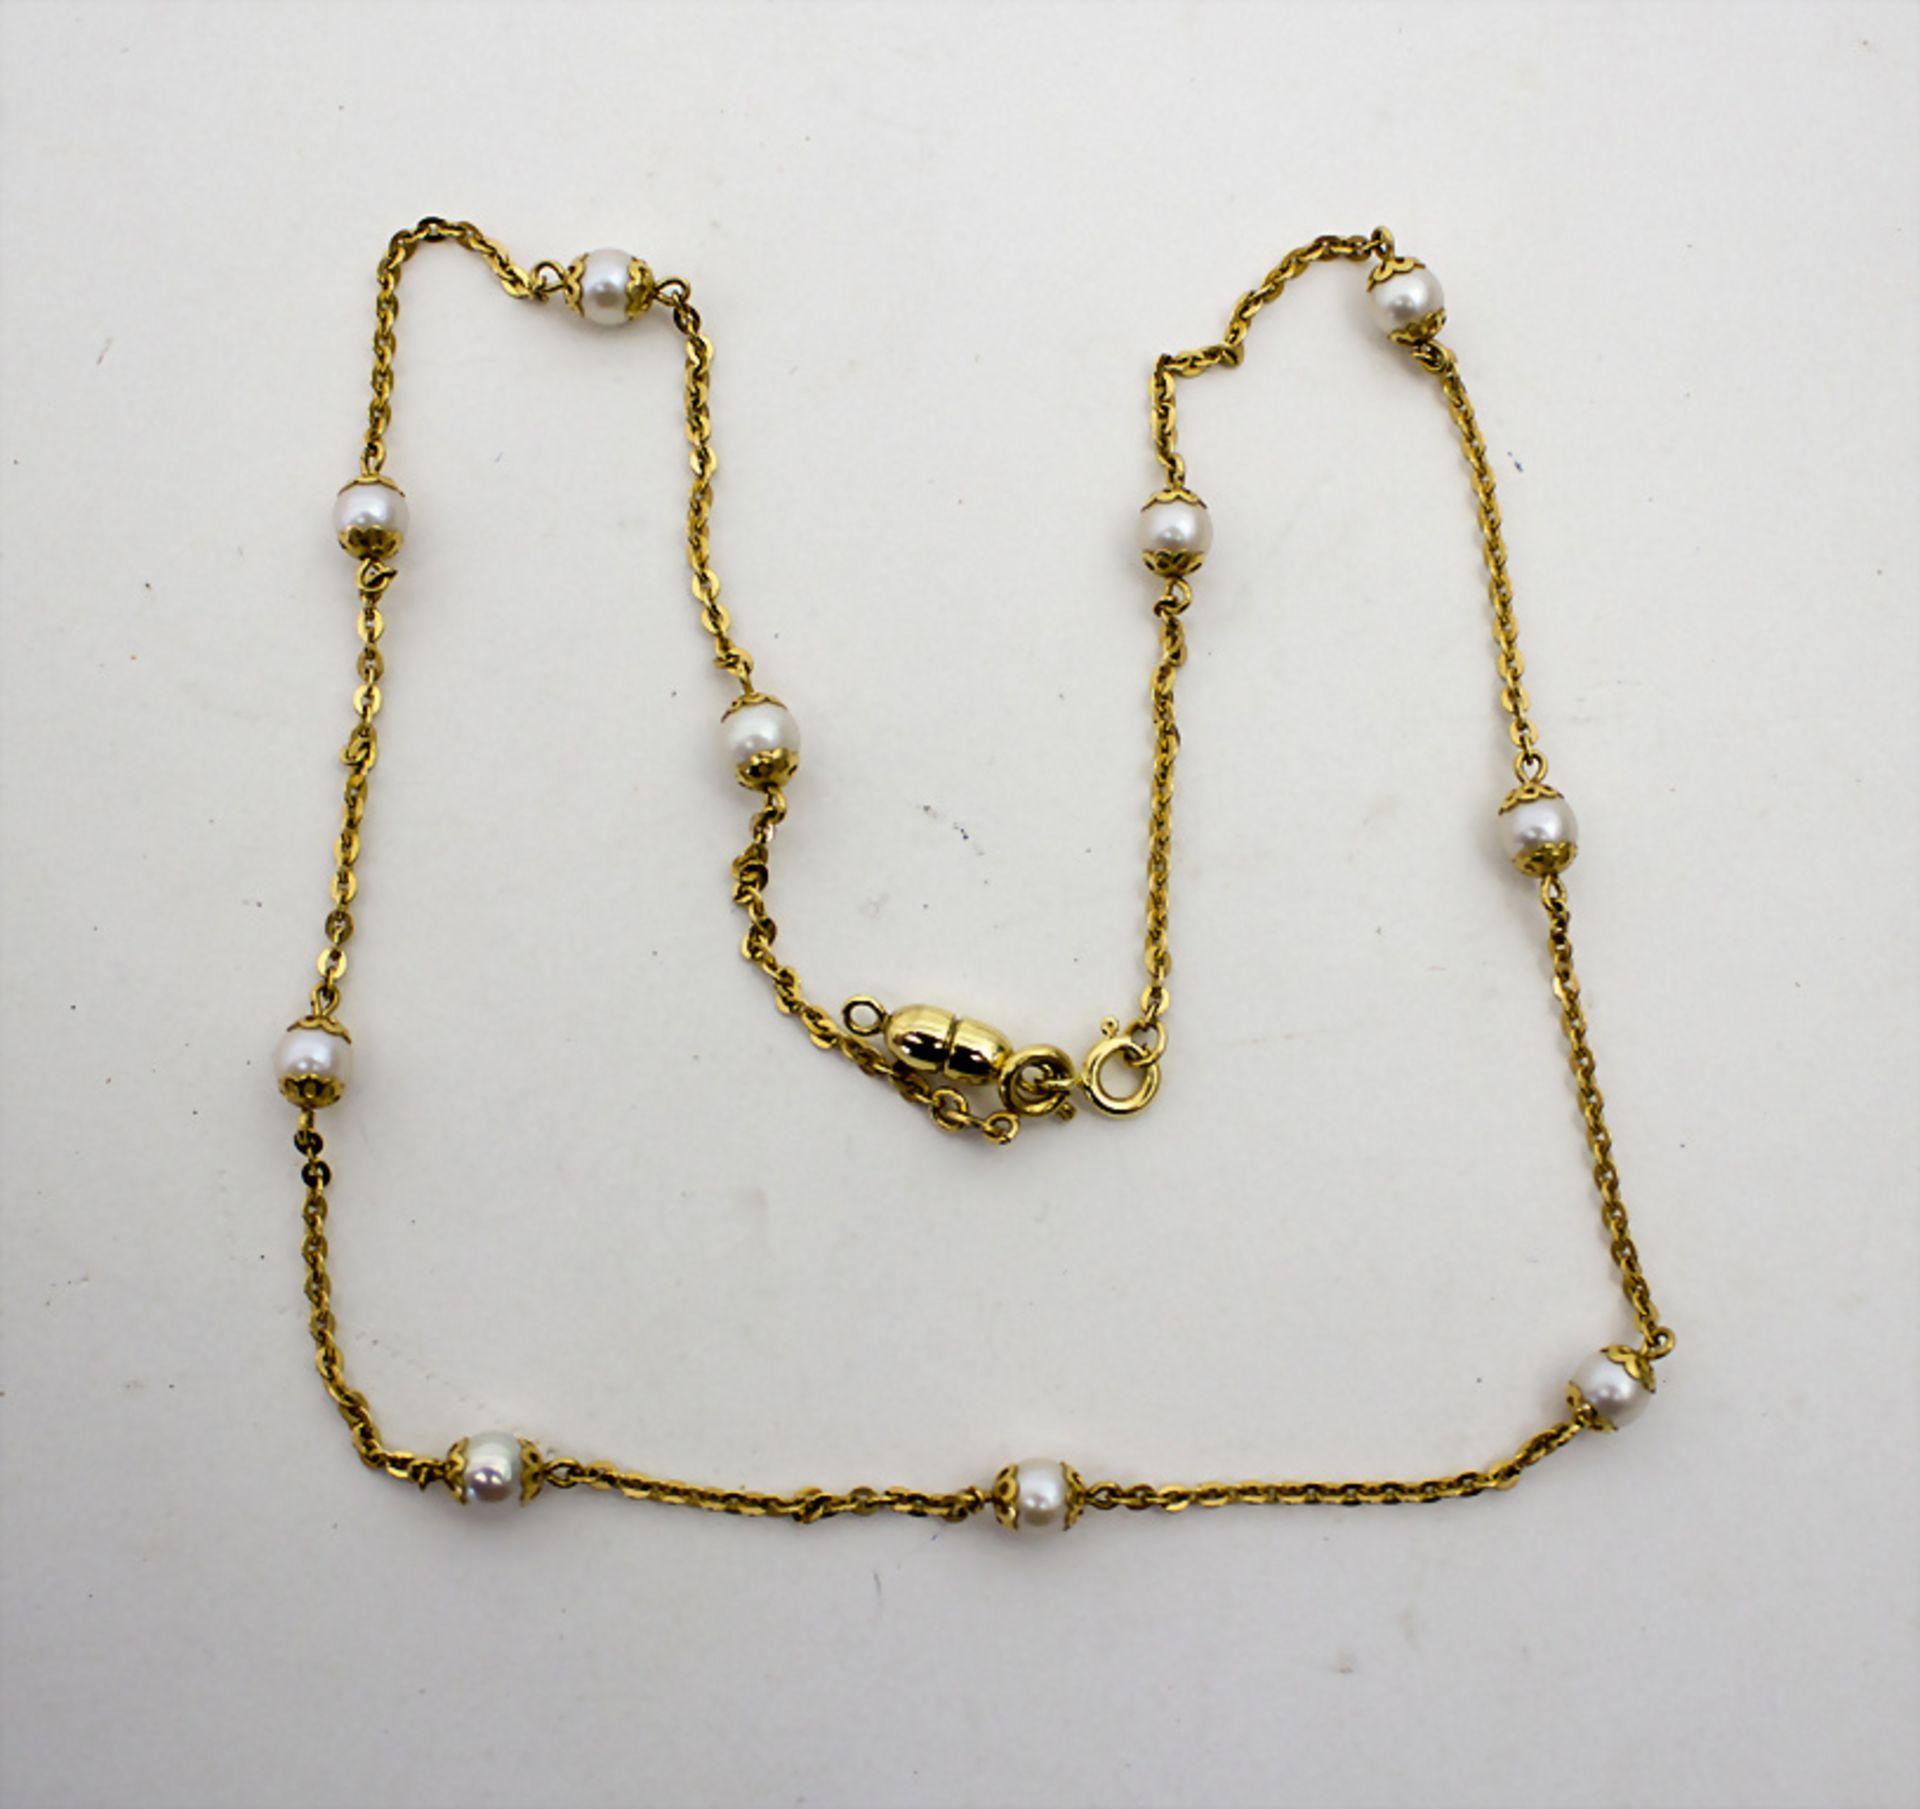 Collier mit Perle / An 18k gold necklace with pearl, Vicenza